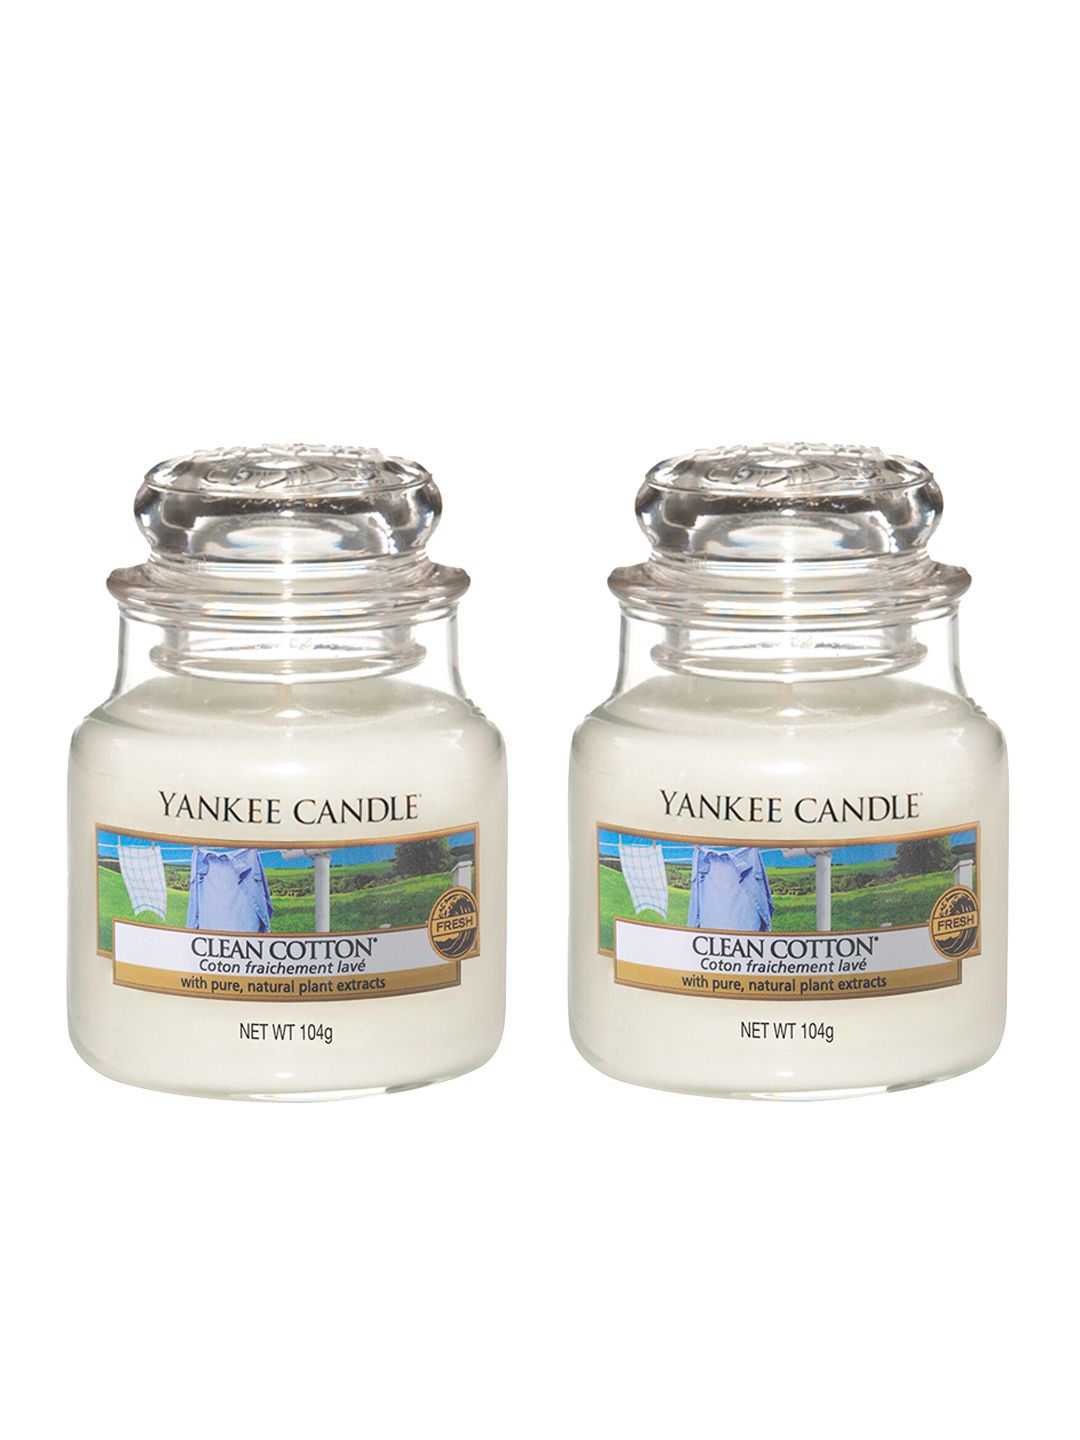 YANKEE CANDLE Set of 2 White Classic Jar Clean Cotton Scented Candles Price in India